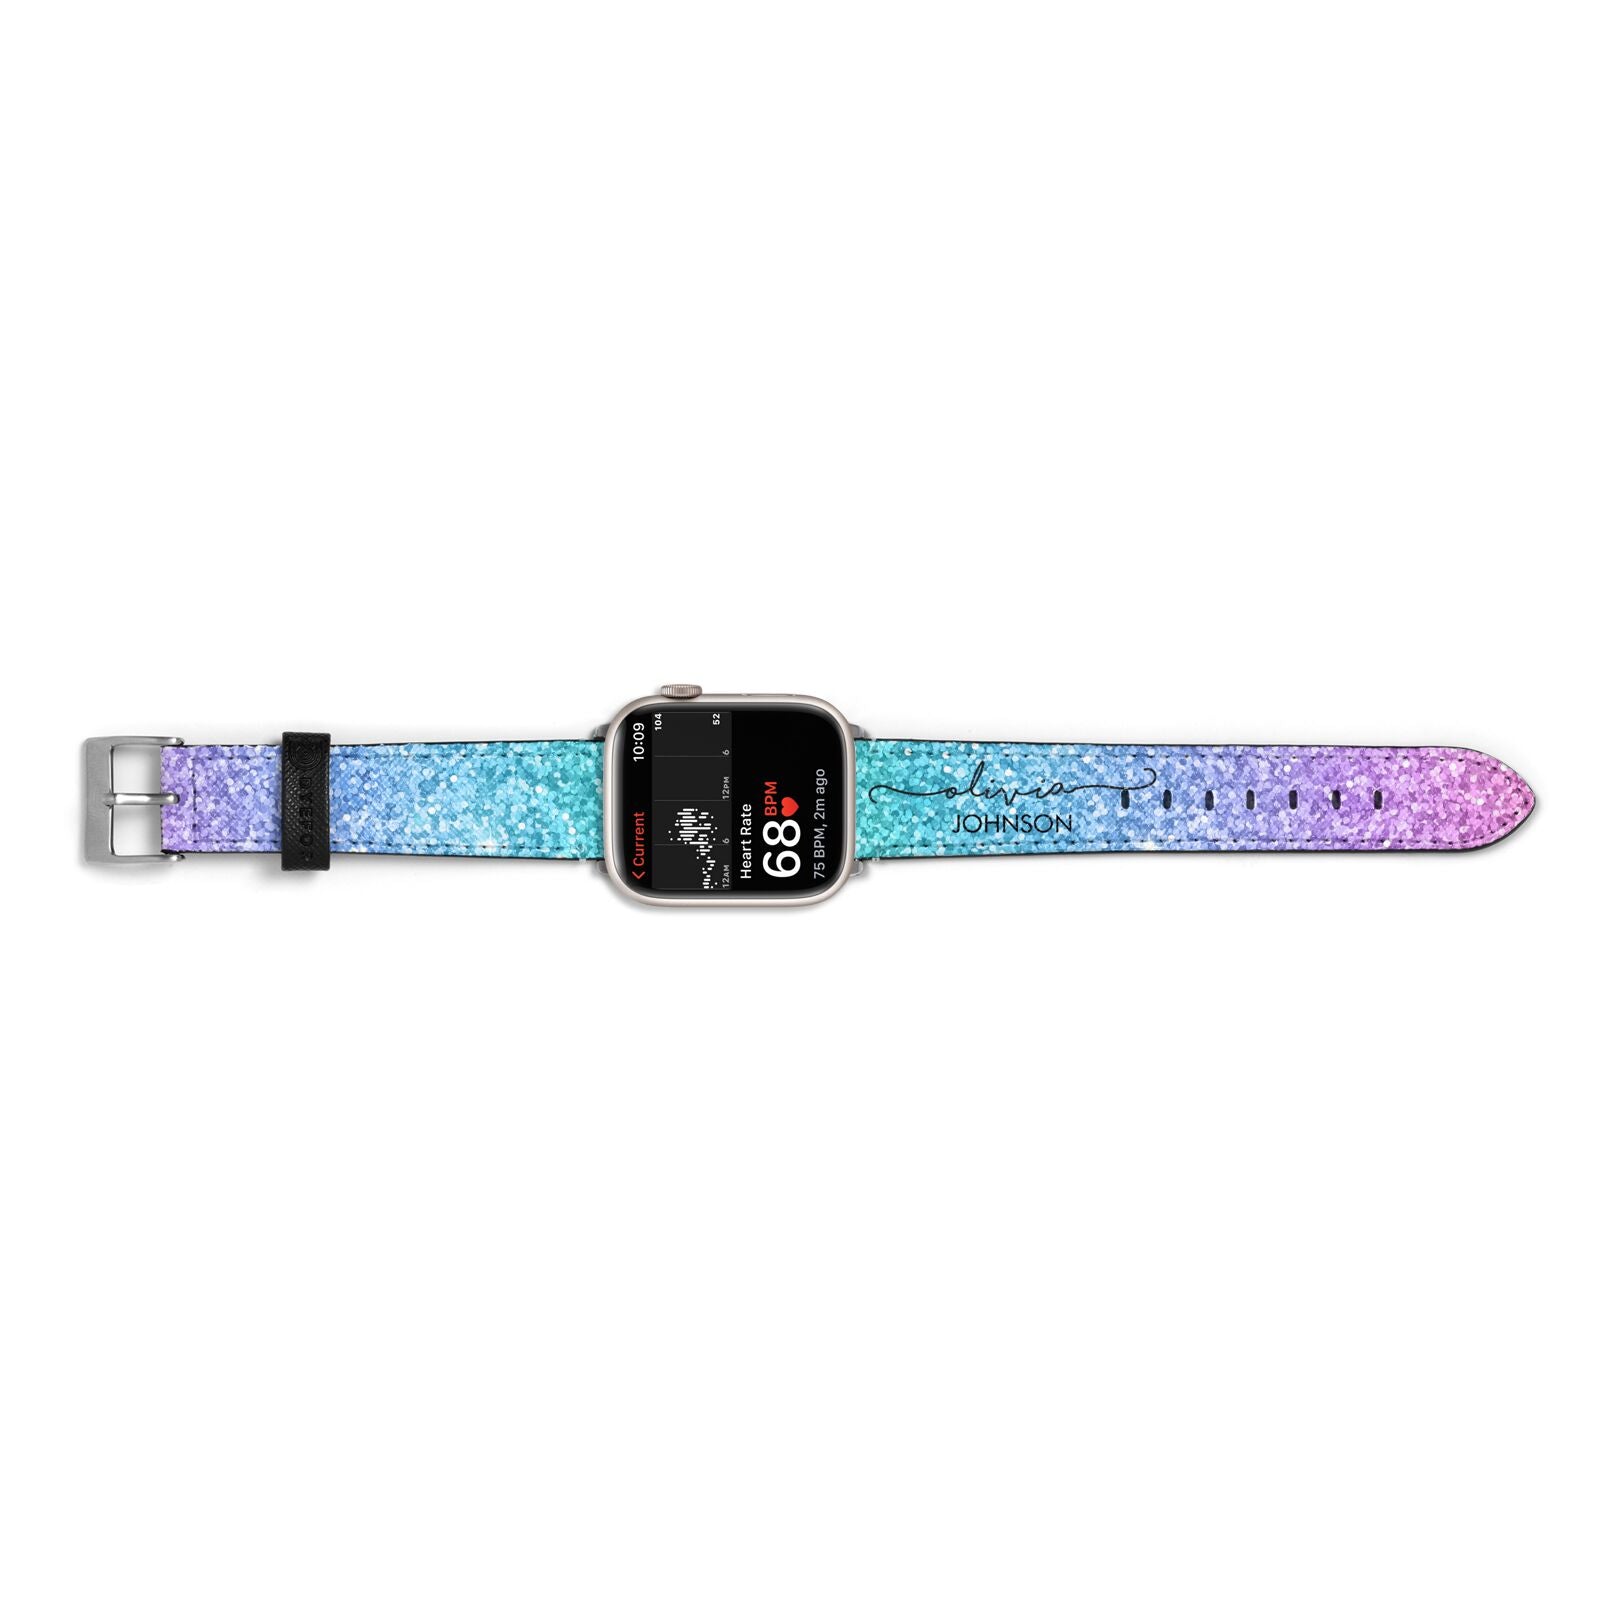 Personalised Ombre Glitter with Names Apple Watch Strap Size 38mm Landscape Image Silver Hardware